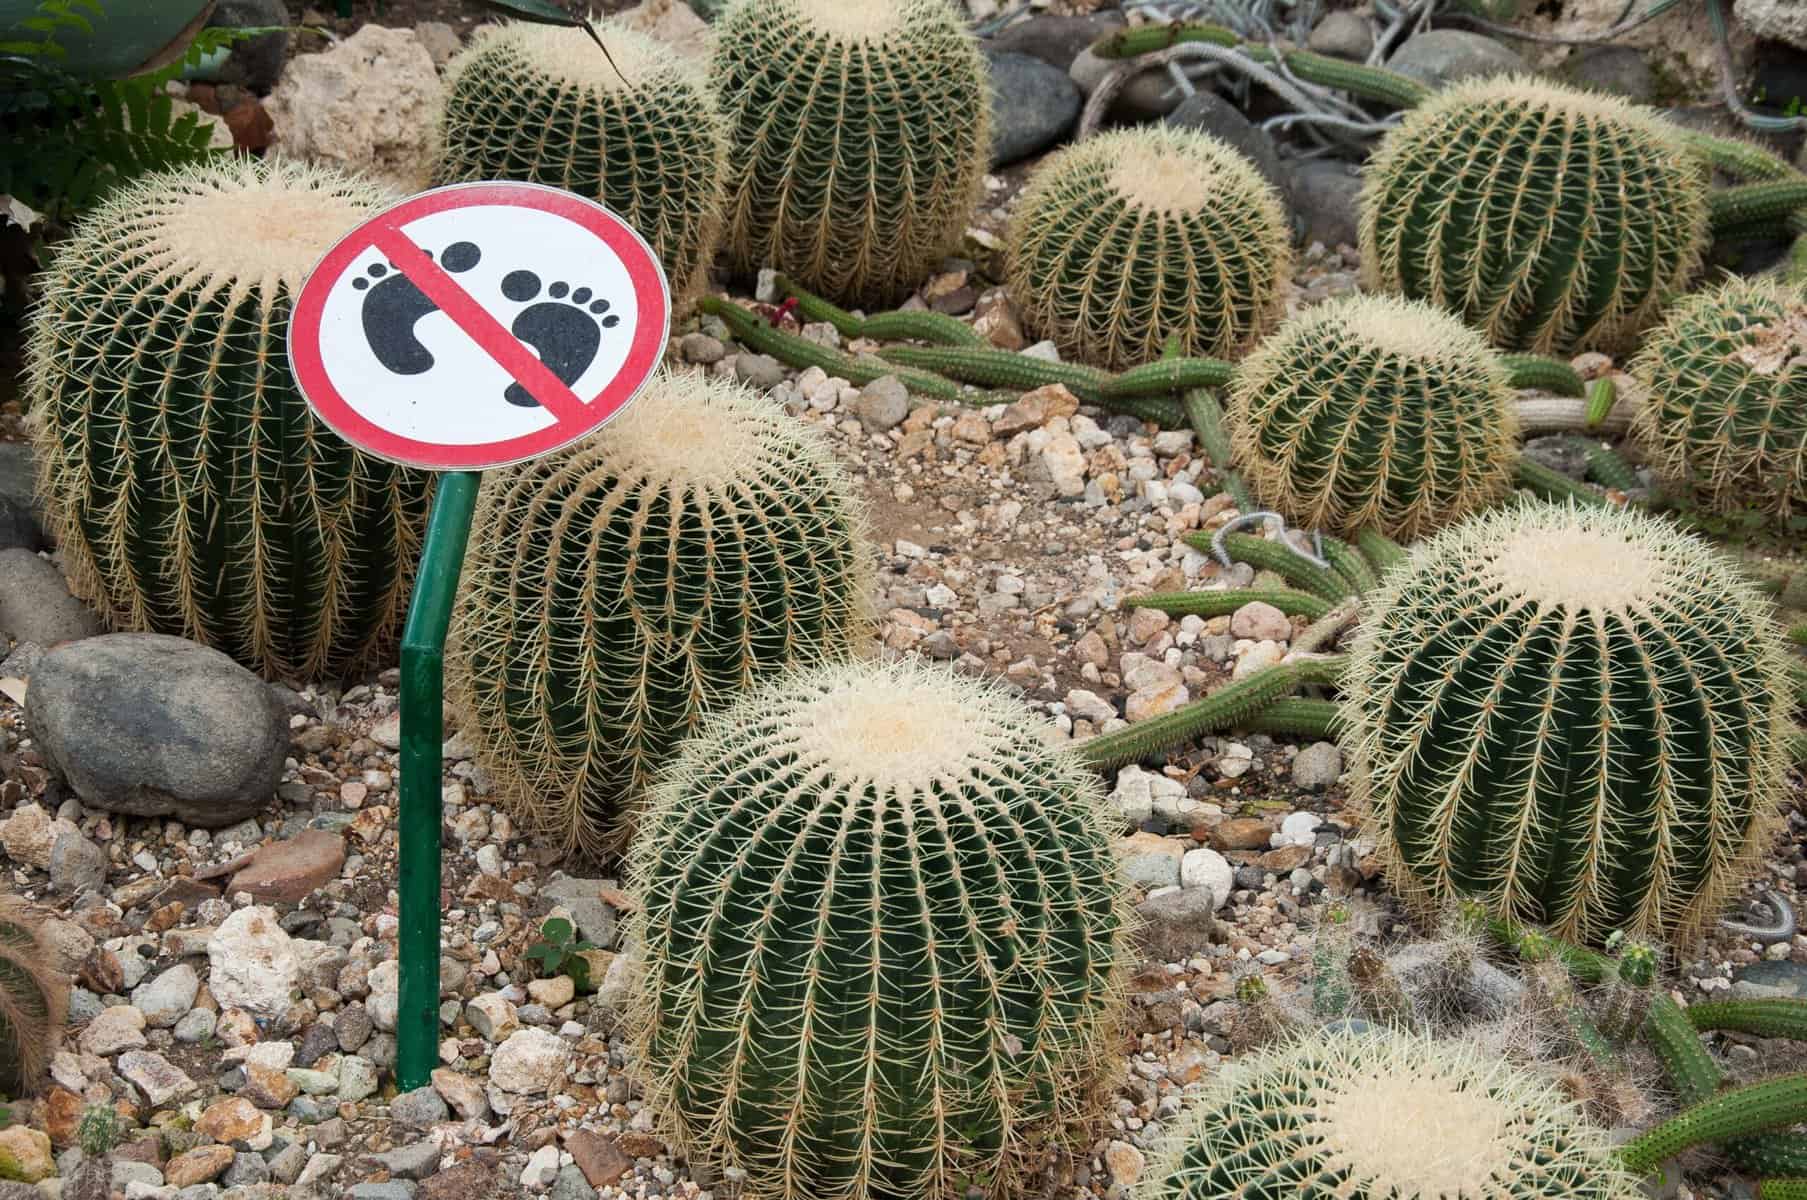 barrel cactus with no bare feet warning sign is a telltale sign to not get stuck without sales training